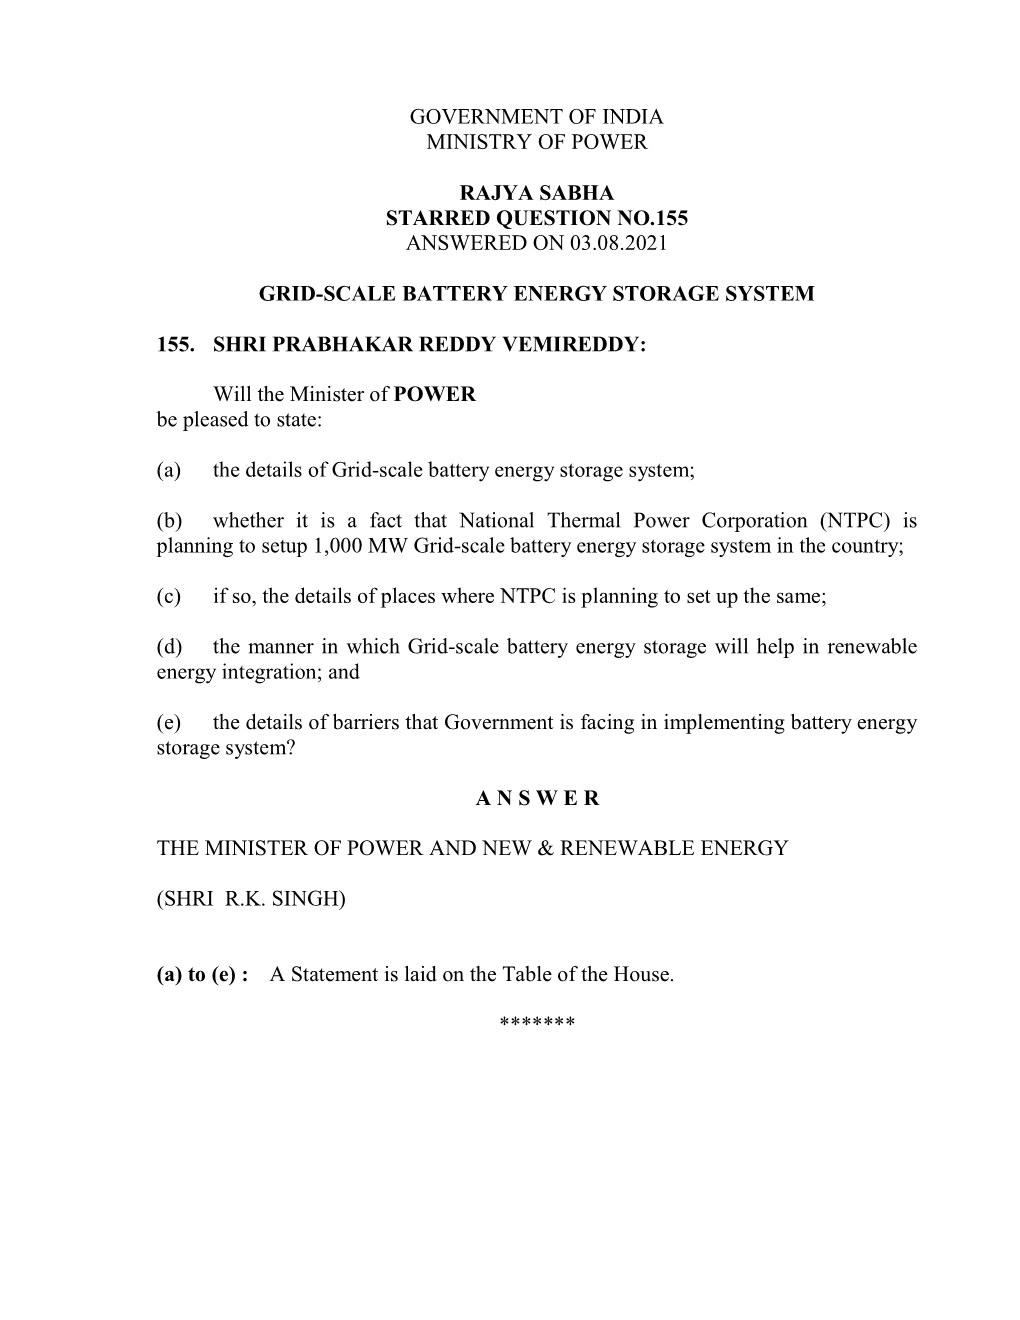 Government of India Ministry of Power Rajya Sabha Starred Question No.155 Answered on 03.08.2021 Grid-Scale Battery Energy Stora